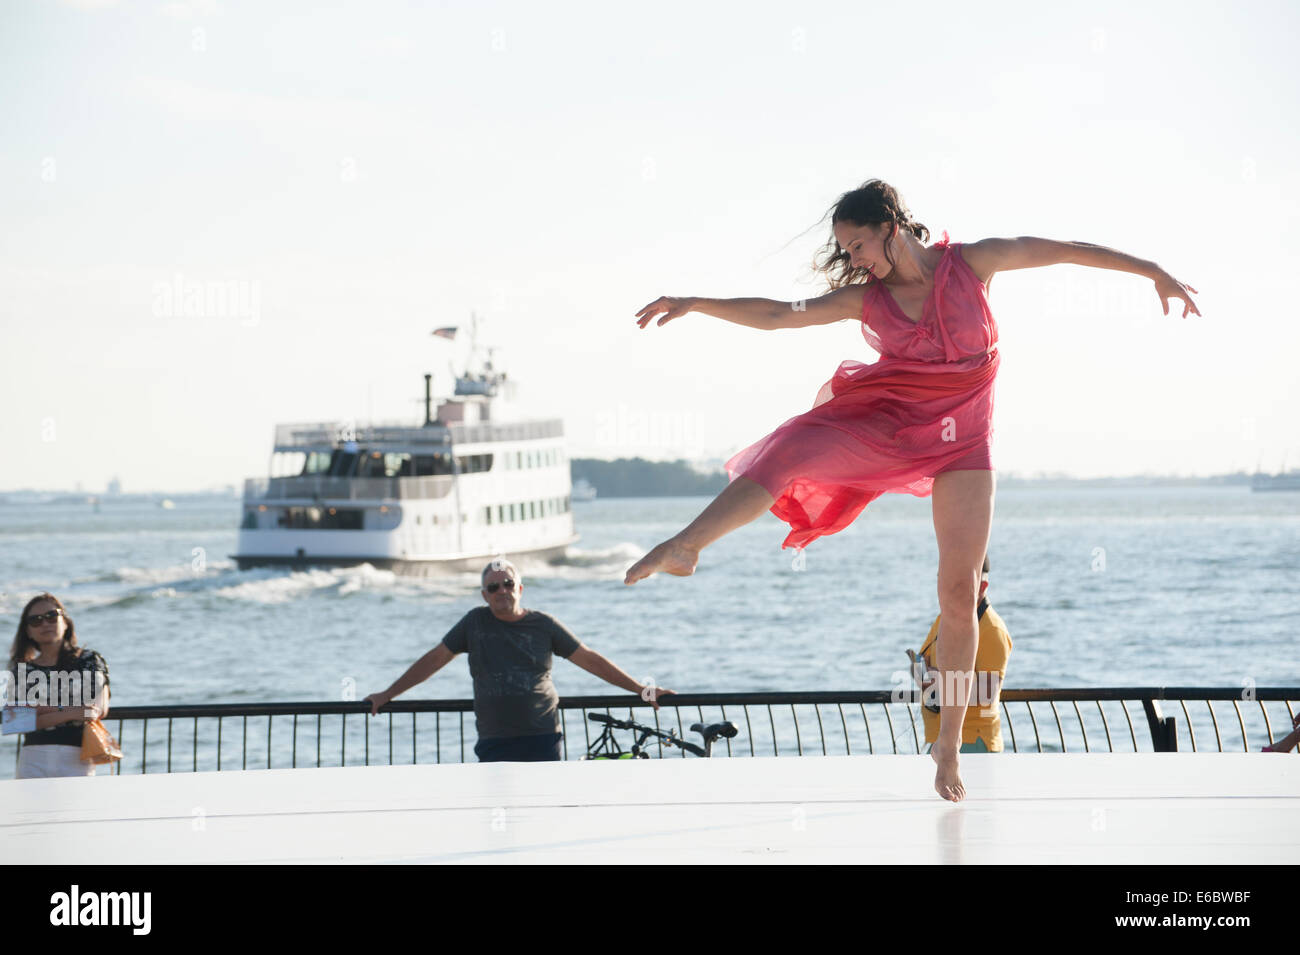 A dancer from the Isadora Duncan Dance Company directed by Lori Belilove at the Downtown Dance Festival in New York City. Stock Photo